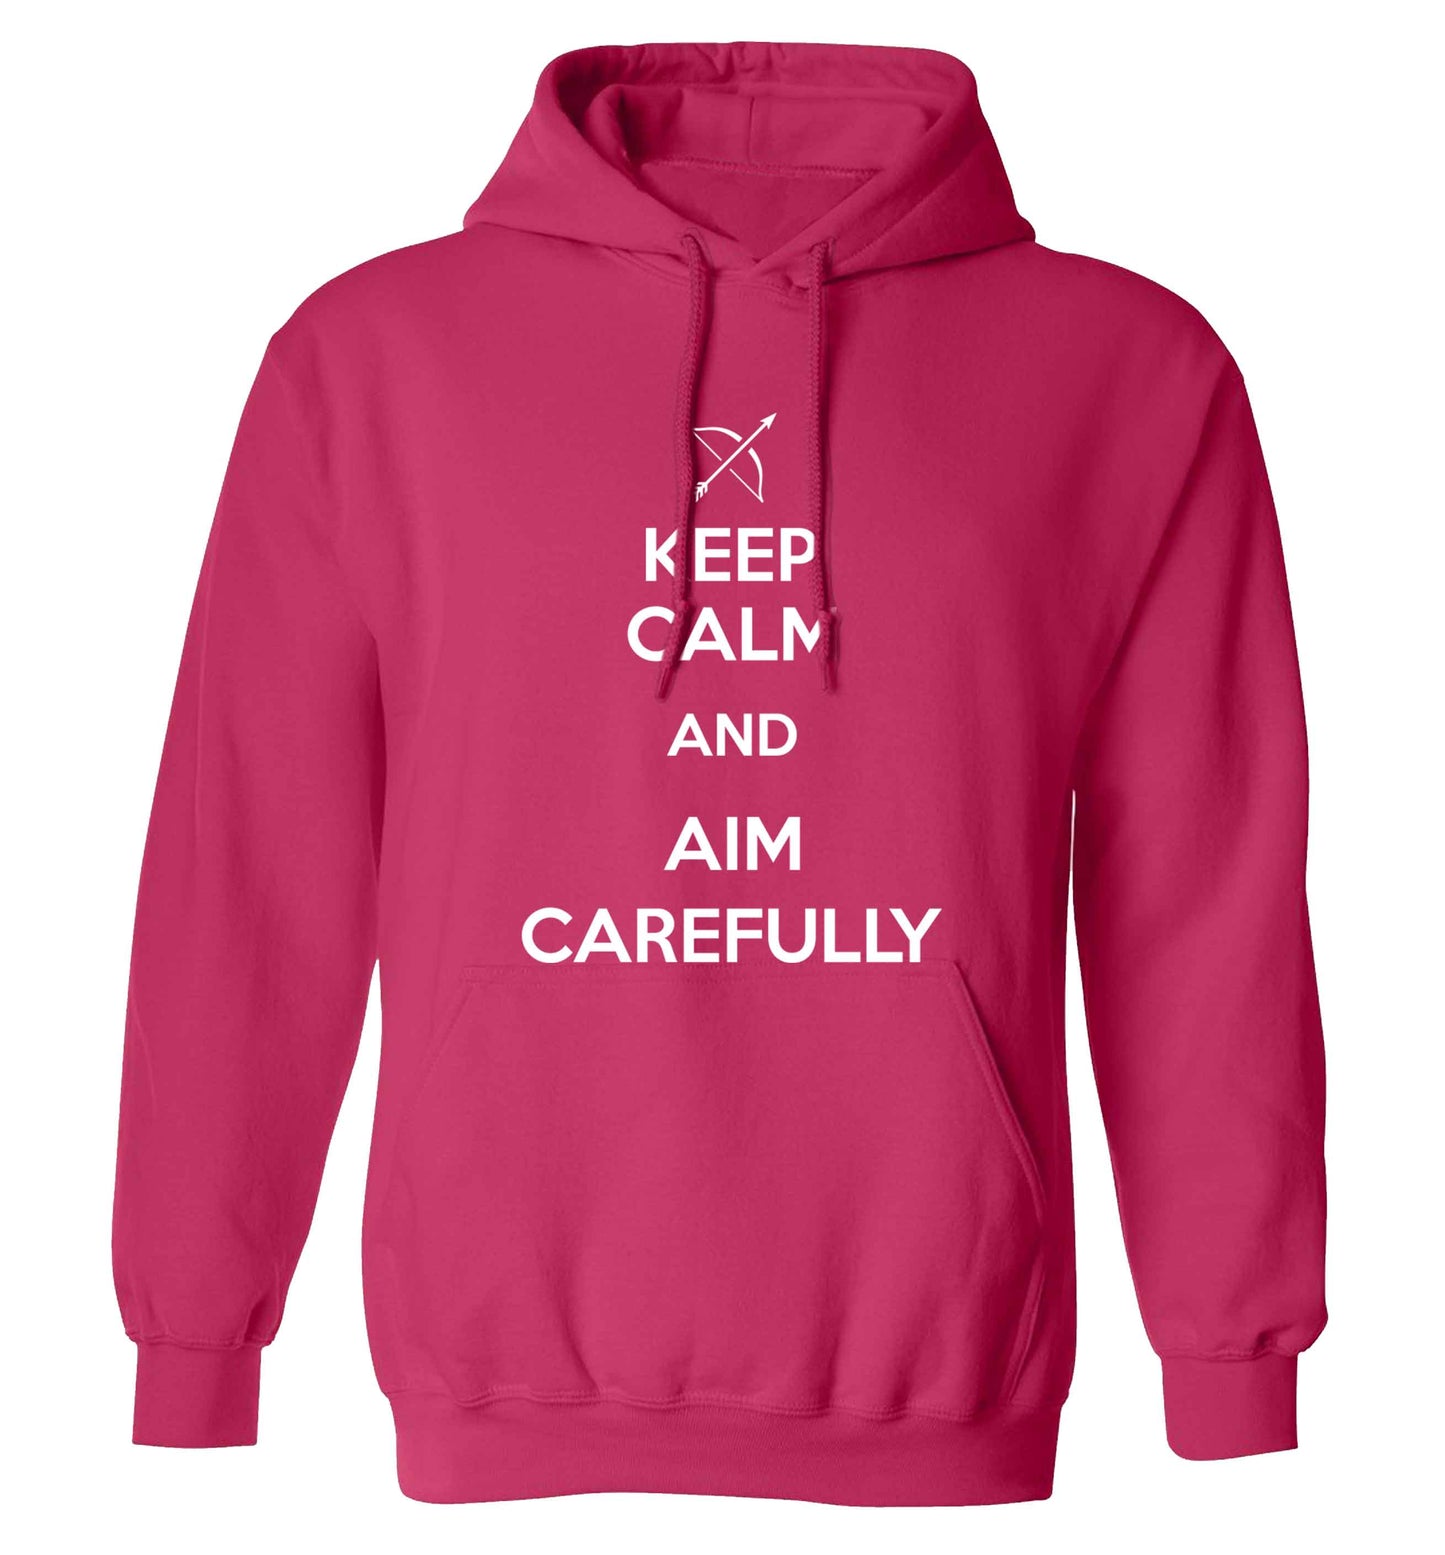 Keep calm and aim carefully adults unisex pink hoodie 2XL